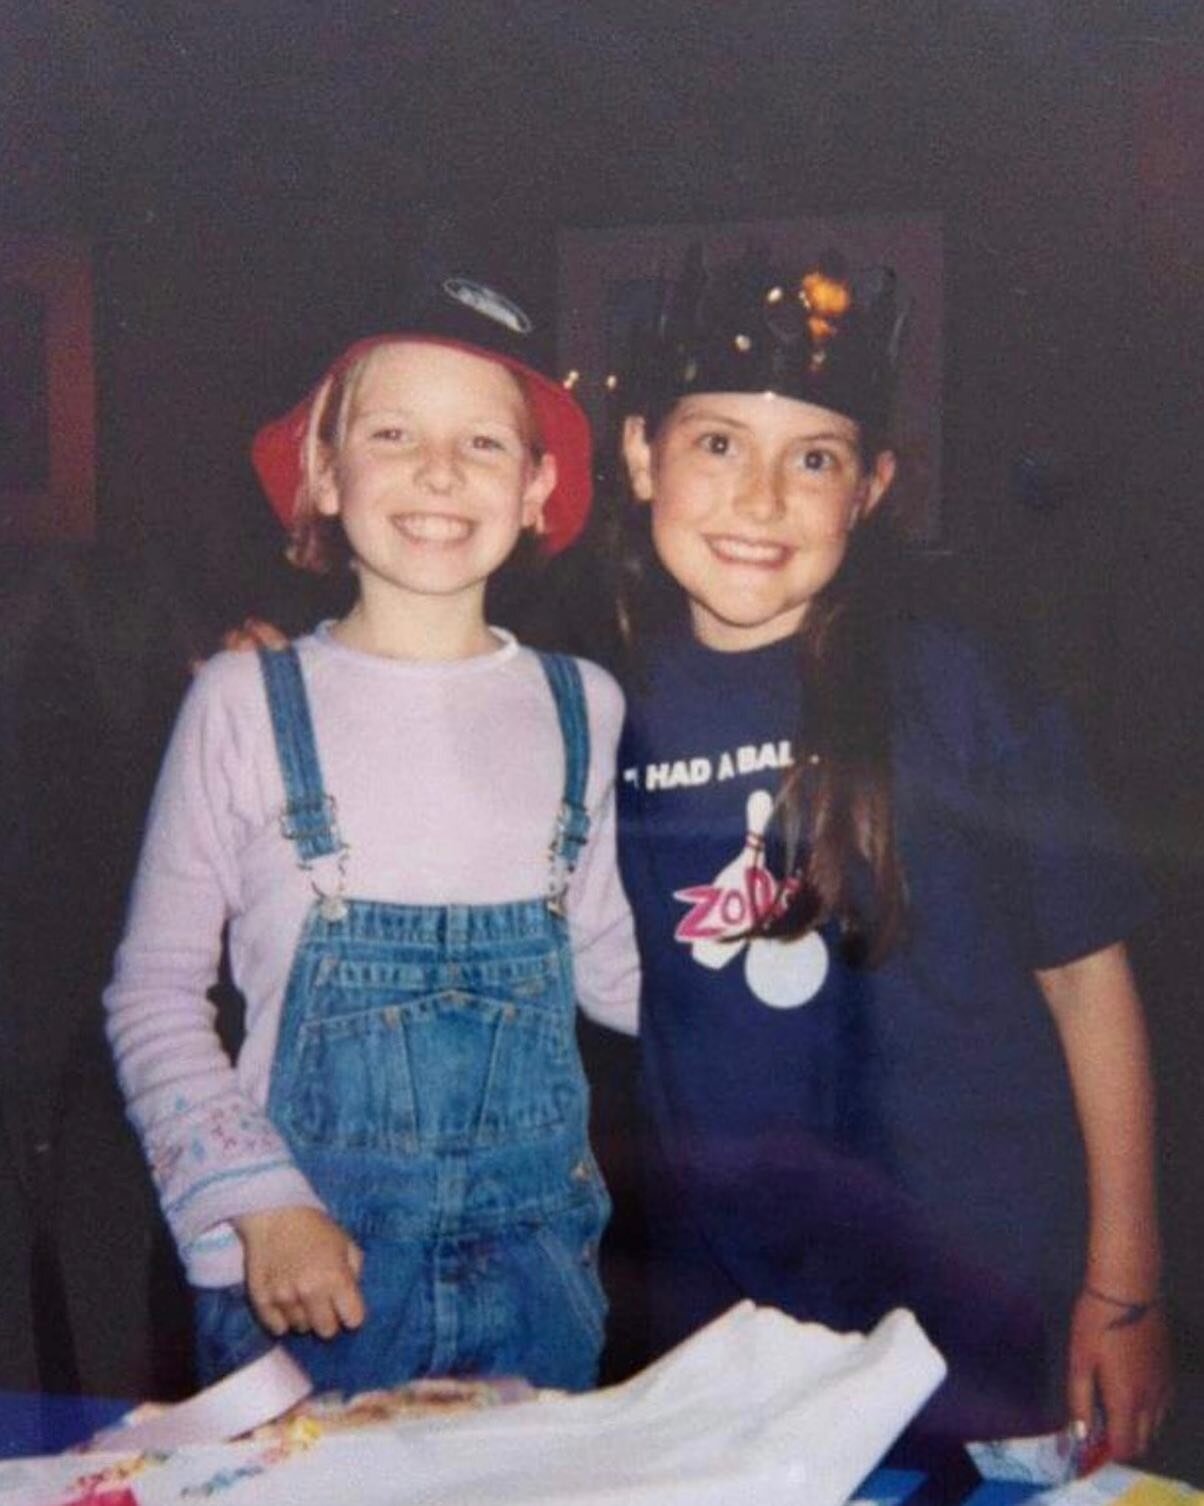 20 years later &hellip; and these two are on a podcast! Link in bio for SBWiSTEM podcast ep 1. Drop a comment with what (or who) you want to hear next! 🎧👯&zwj;♀️